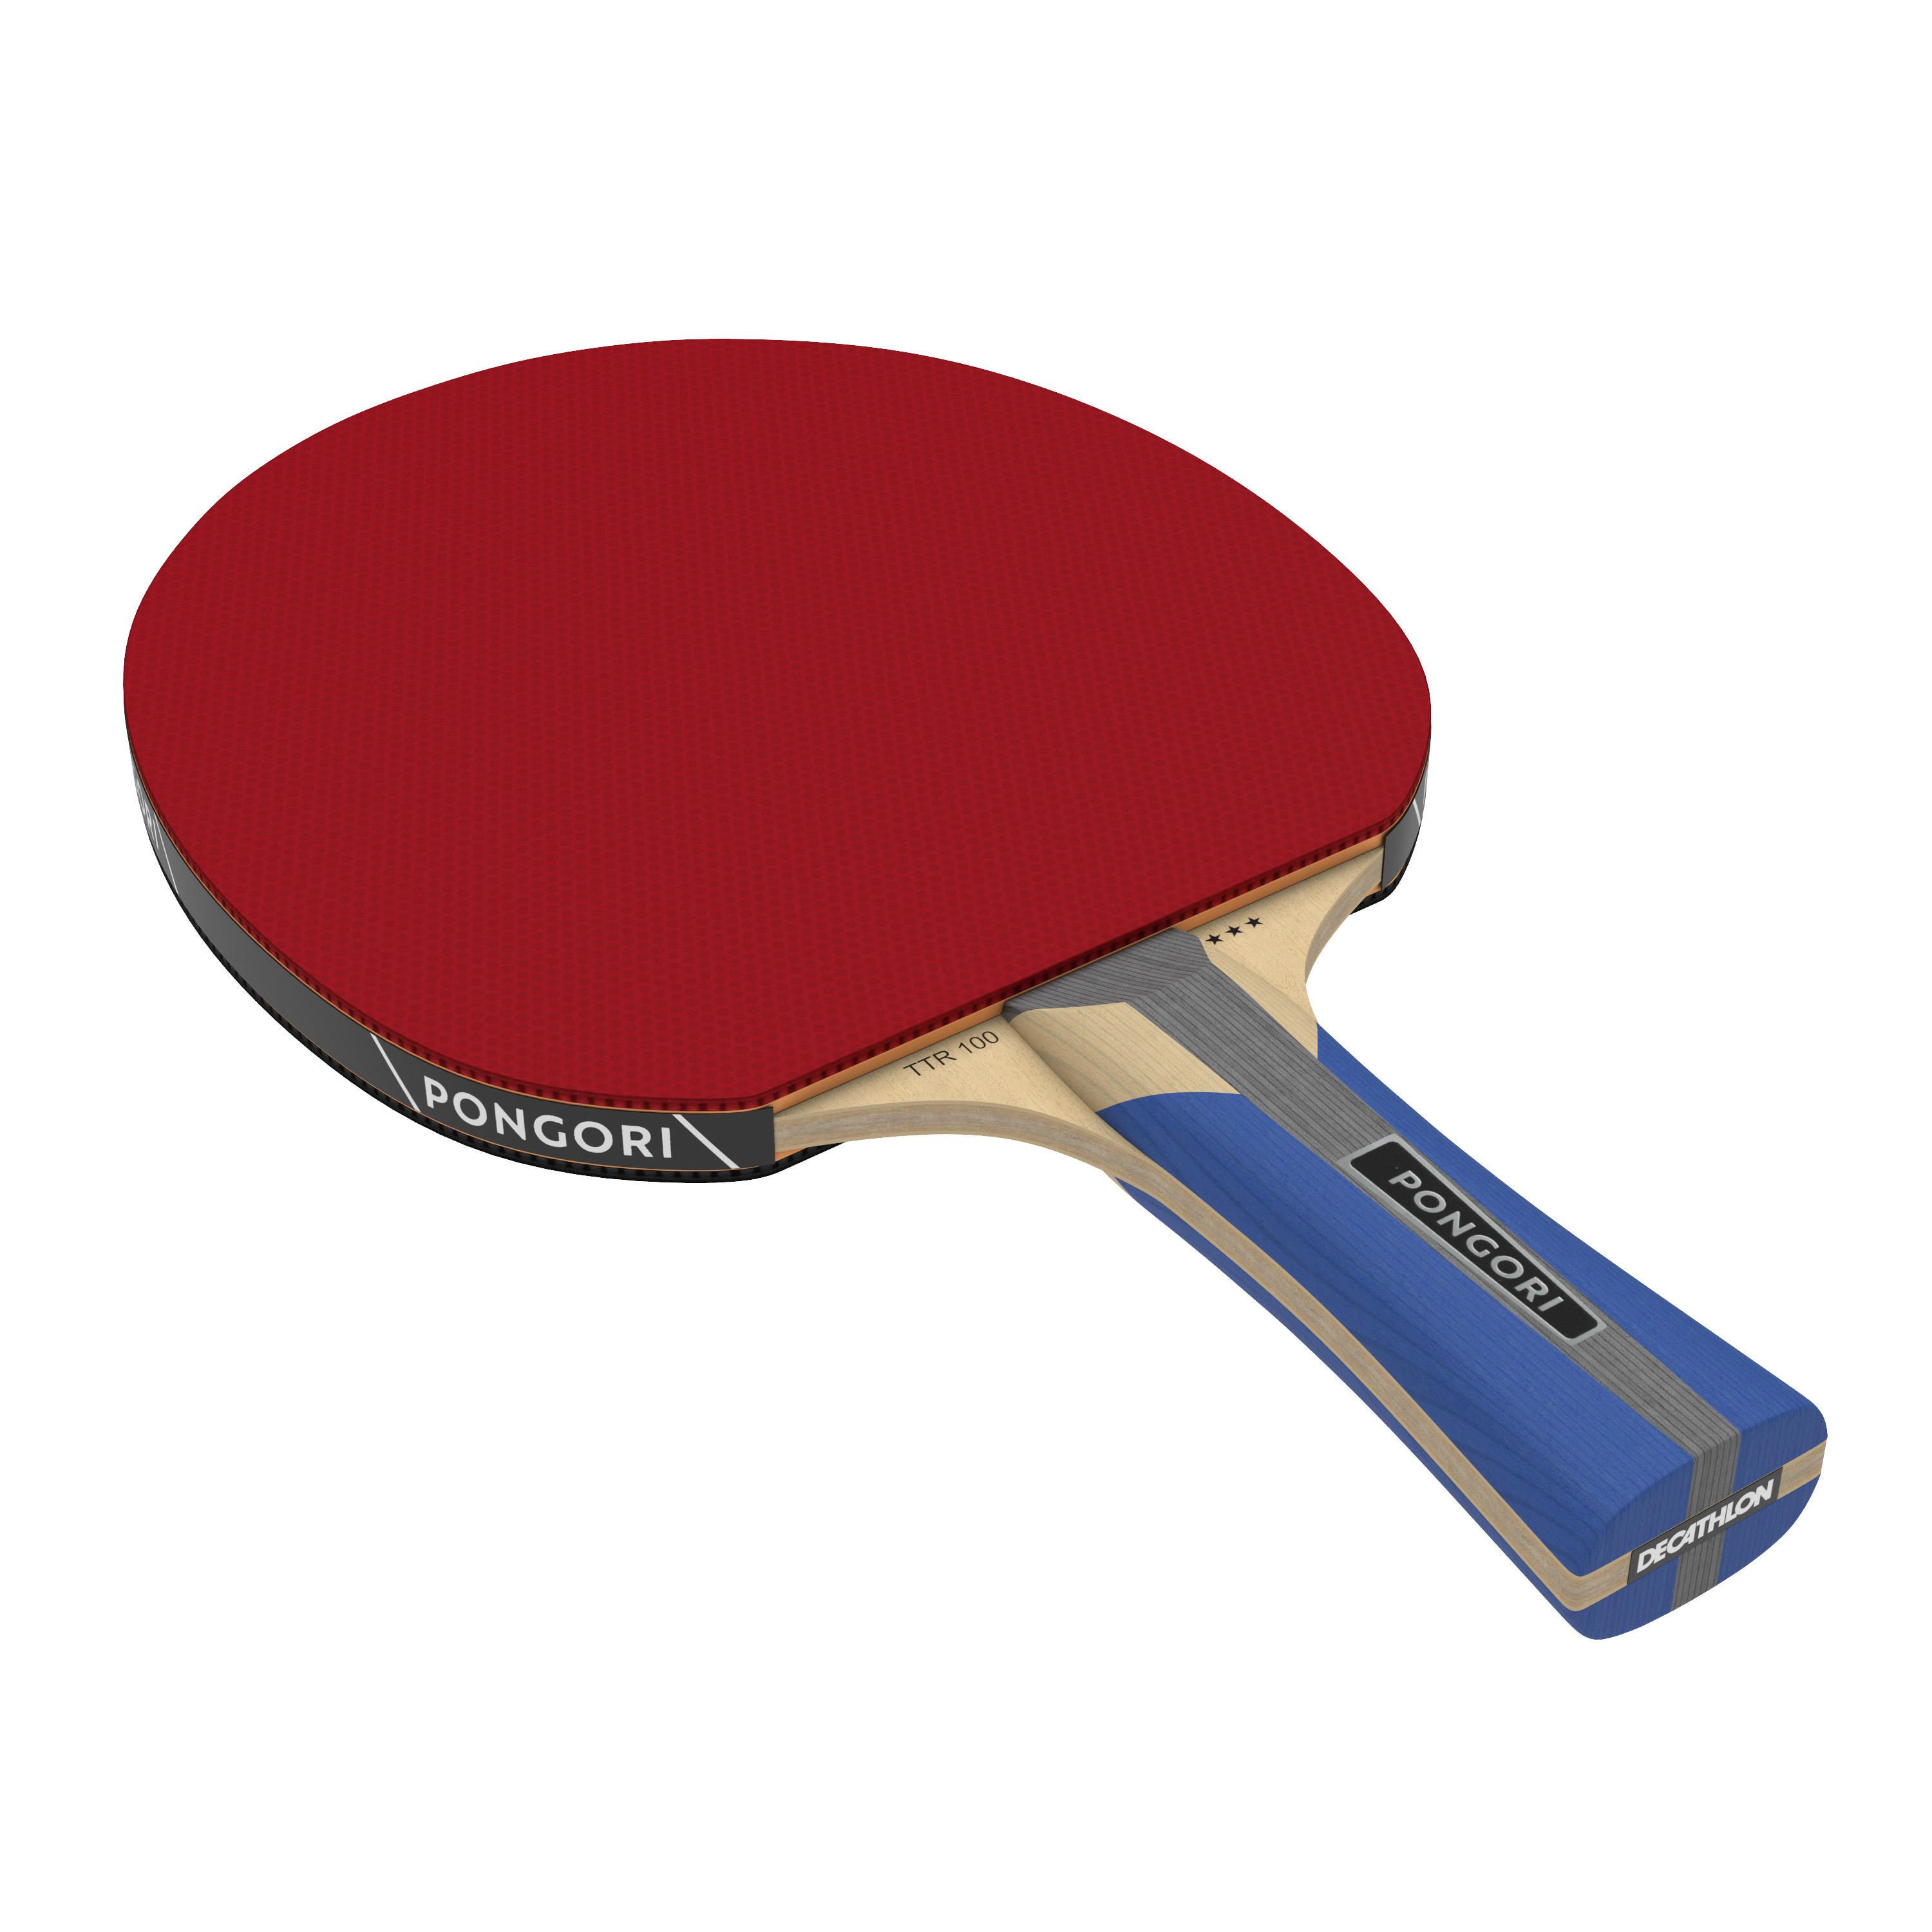 Rymora Table Tennis 2 Player Set 2 Bats and 3 Balls Perfect for School, Home, Sports Club, Office 